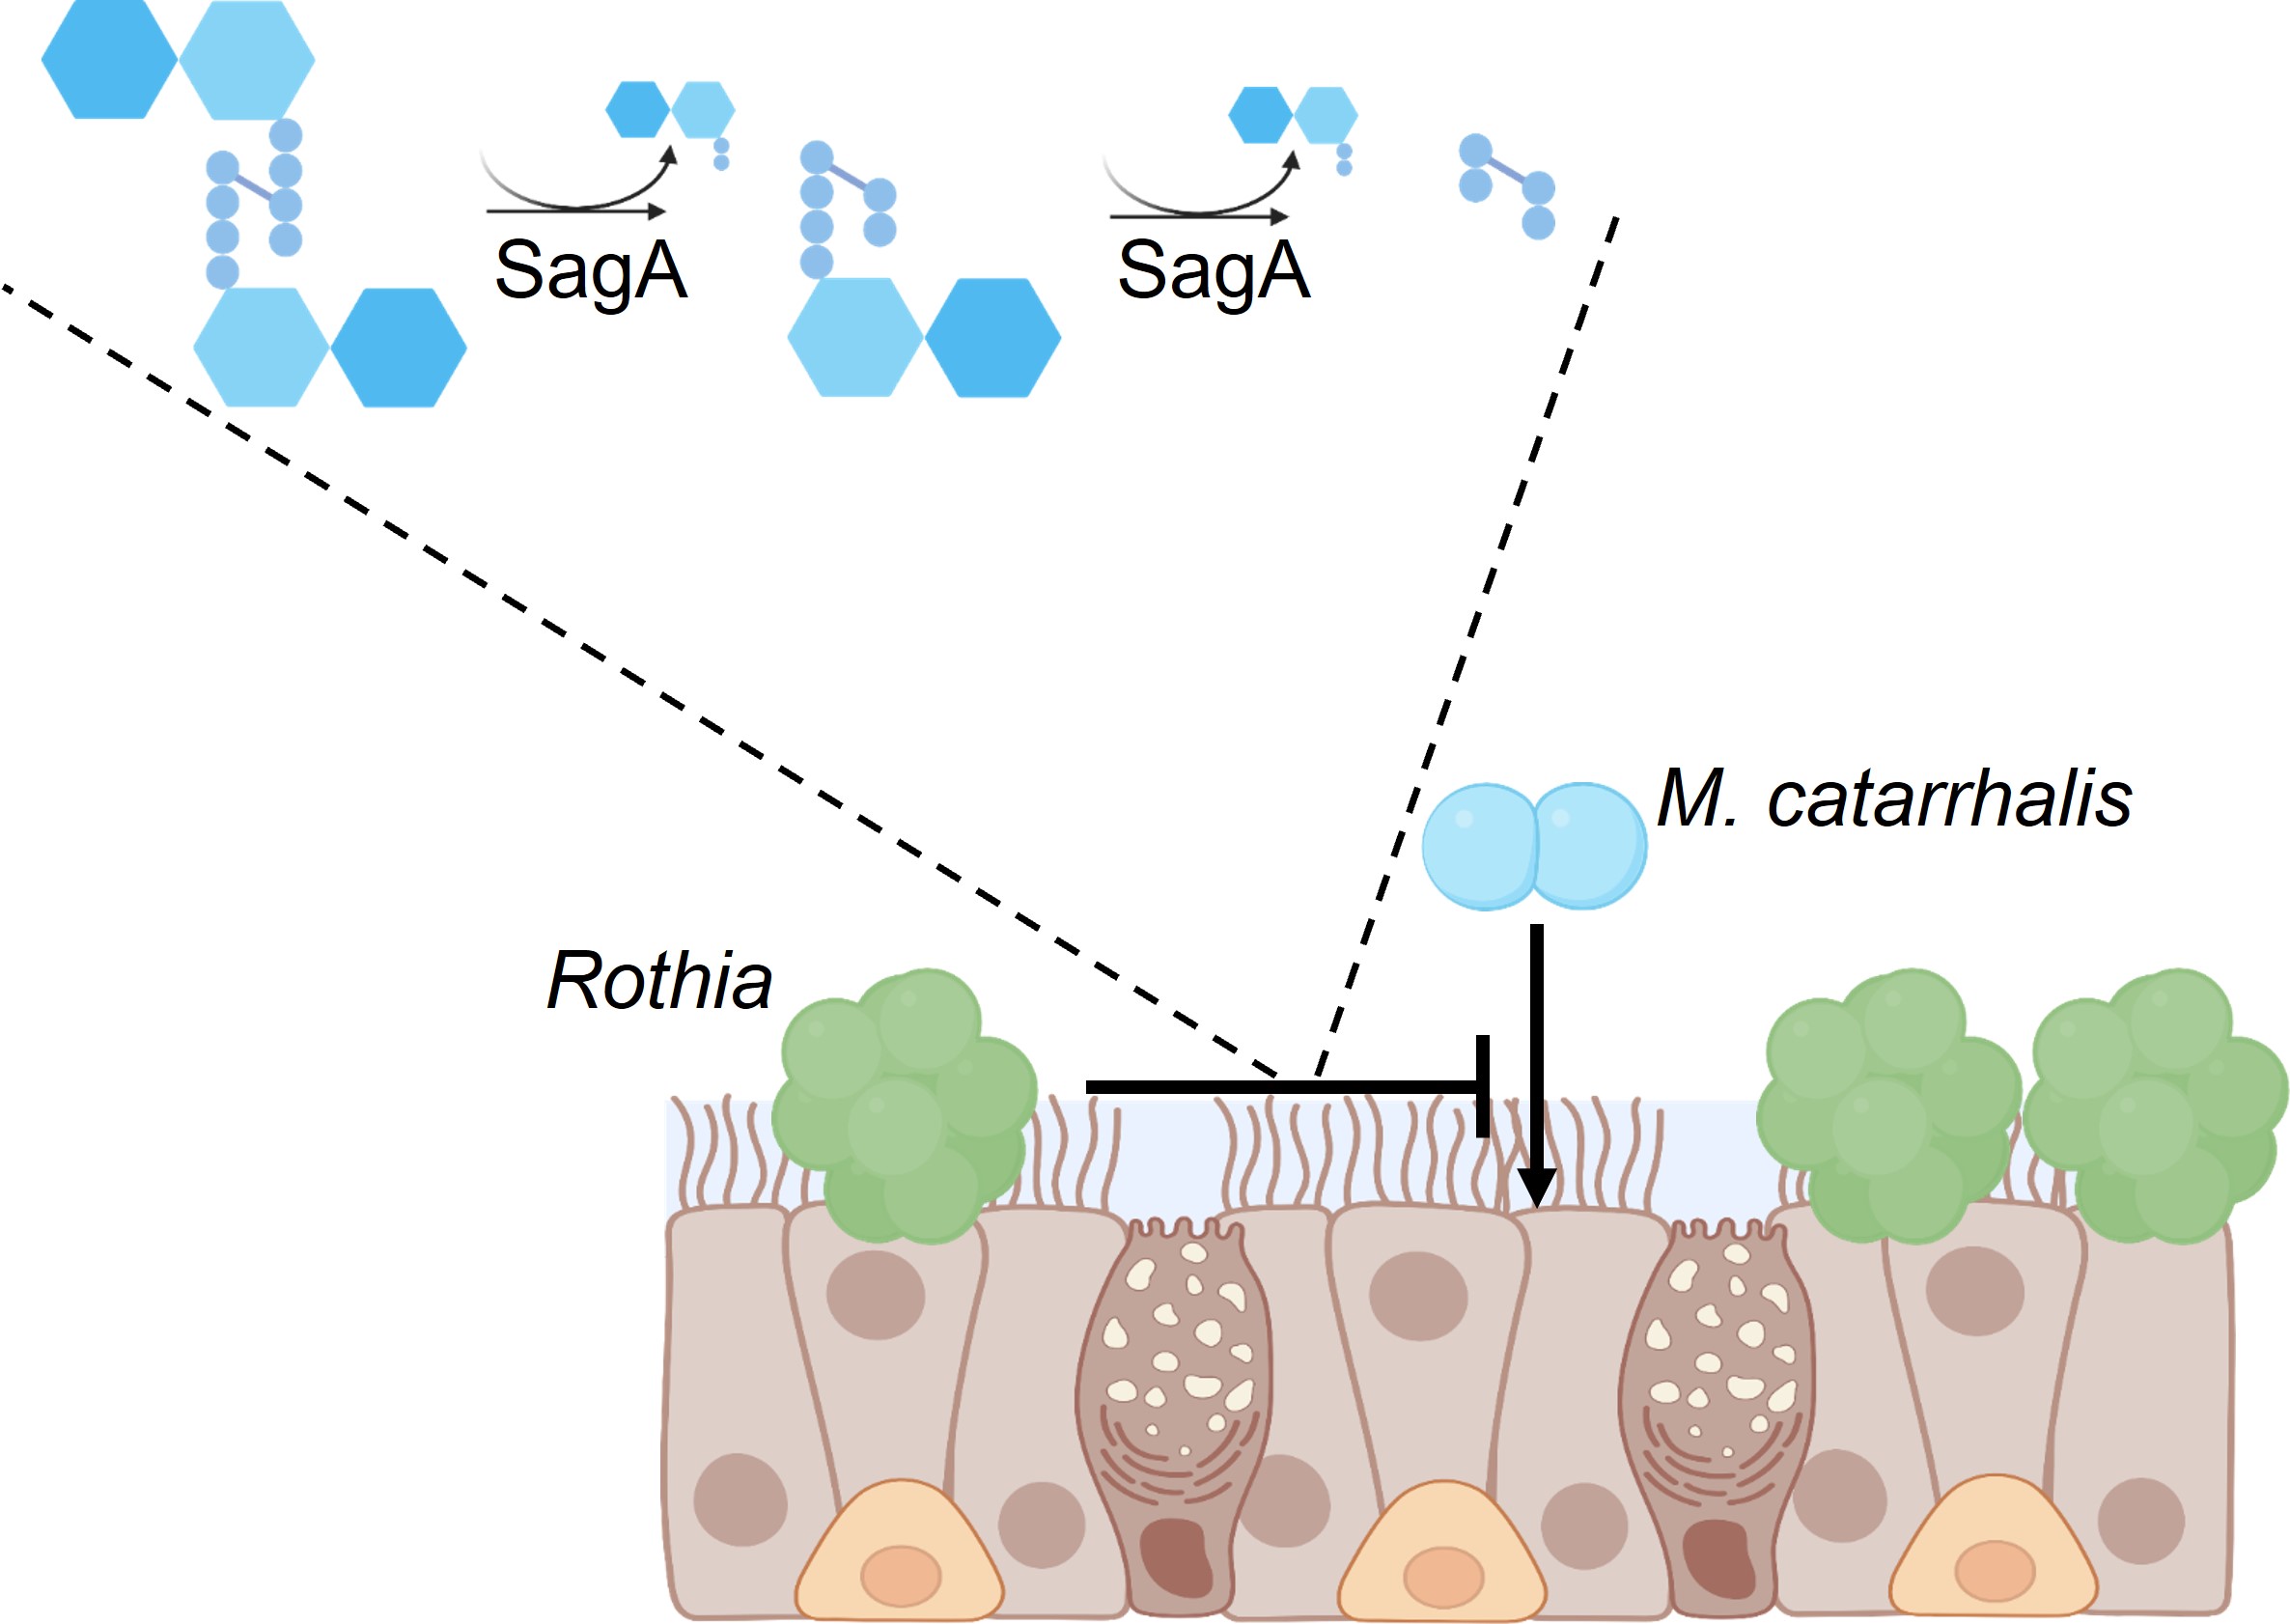 This diagram depitcs Rothia producing the secreted enzyme SagA, which degrades Moraxella catarrhalis peptidoglycan and prevents colonization of the respiratory epithelium.